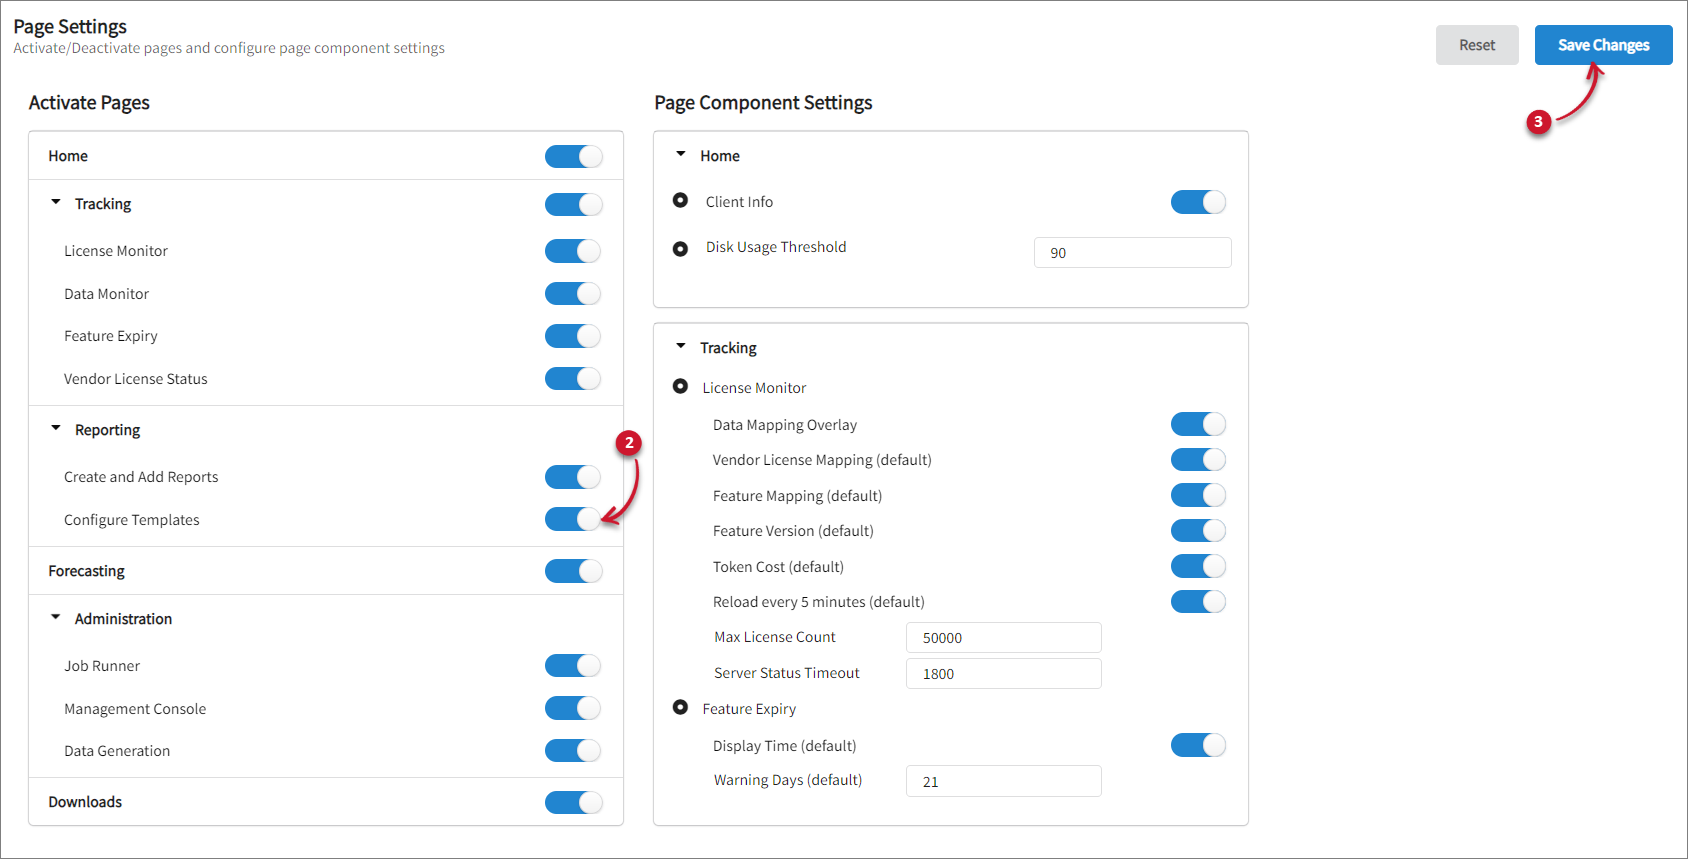 Activating the Configure Templates Tab